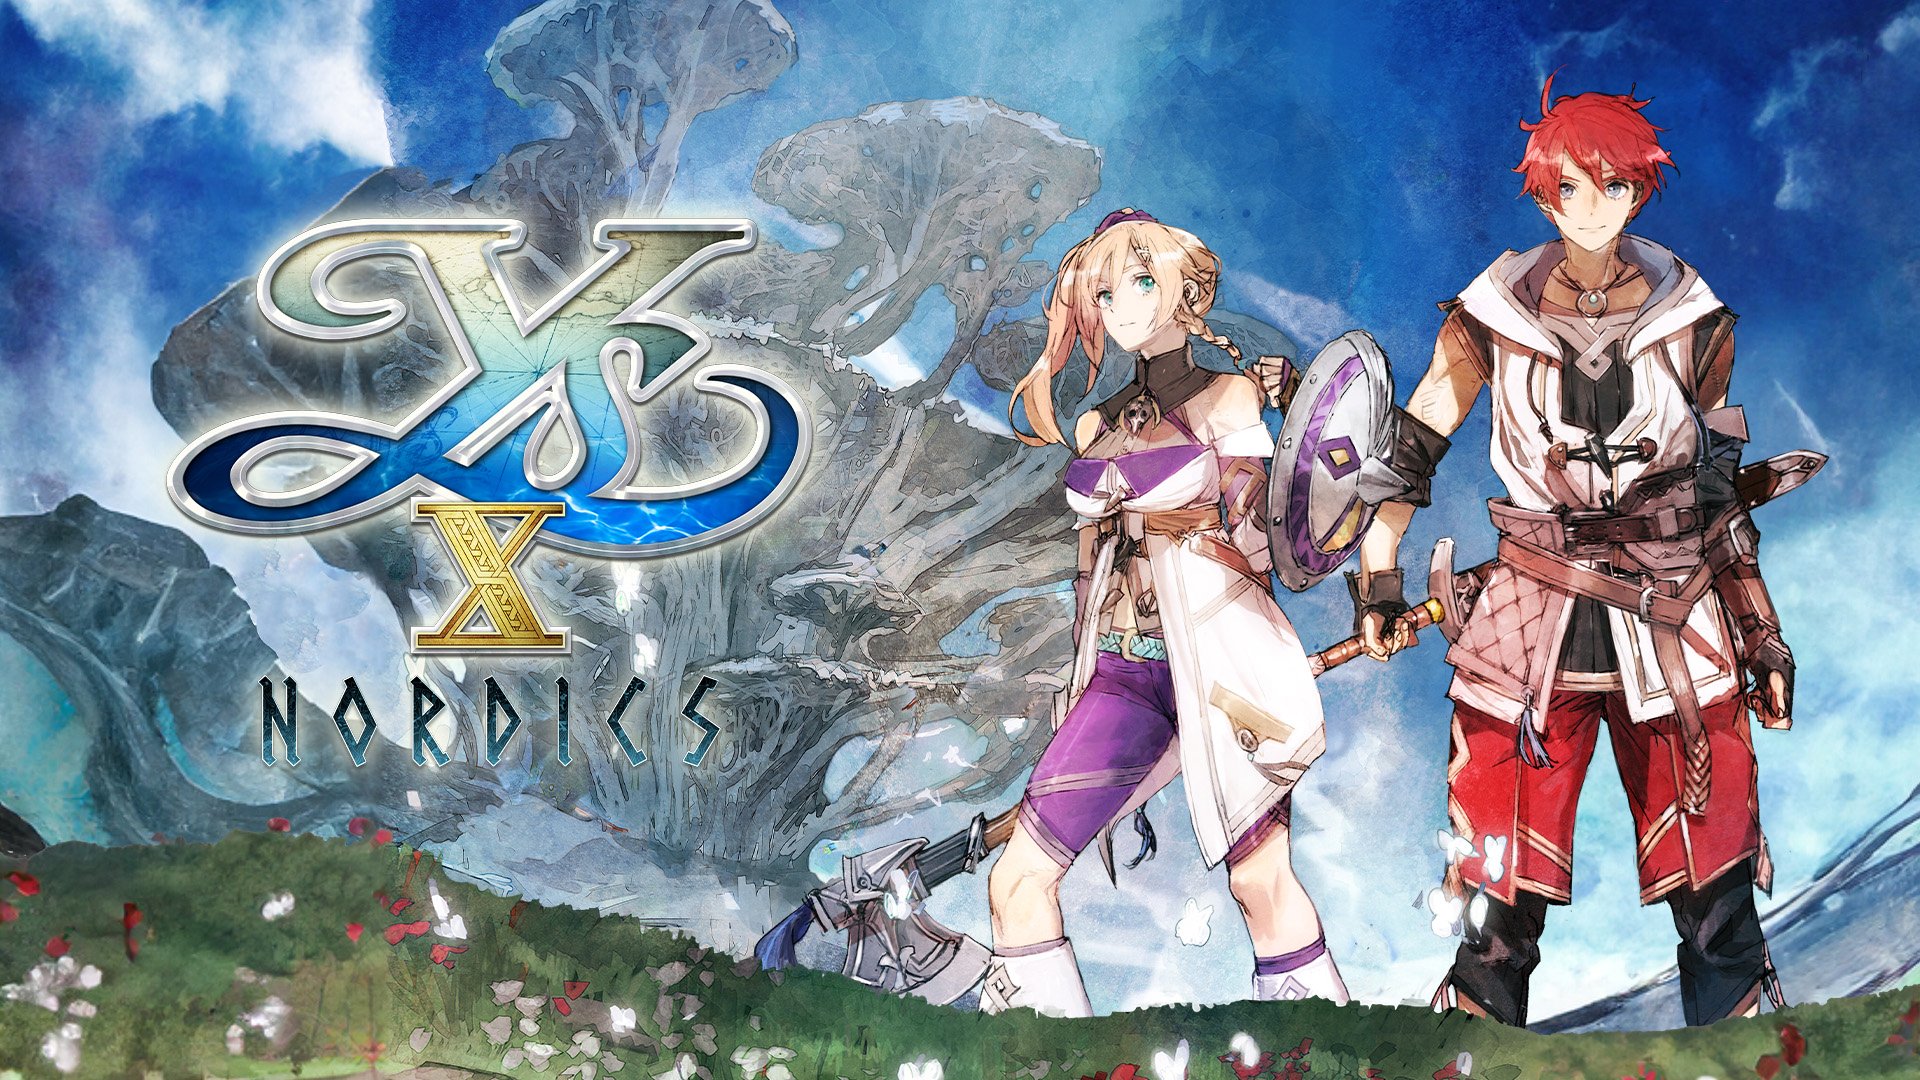 Ys X: Nordics Brings Epic Adventure to the West this Autumn – Coming to PS5, PS4, Switch, and PC